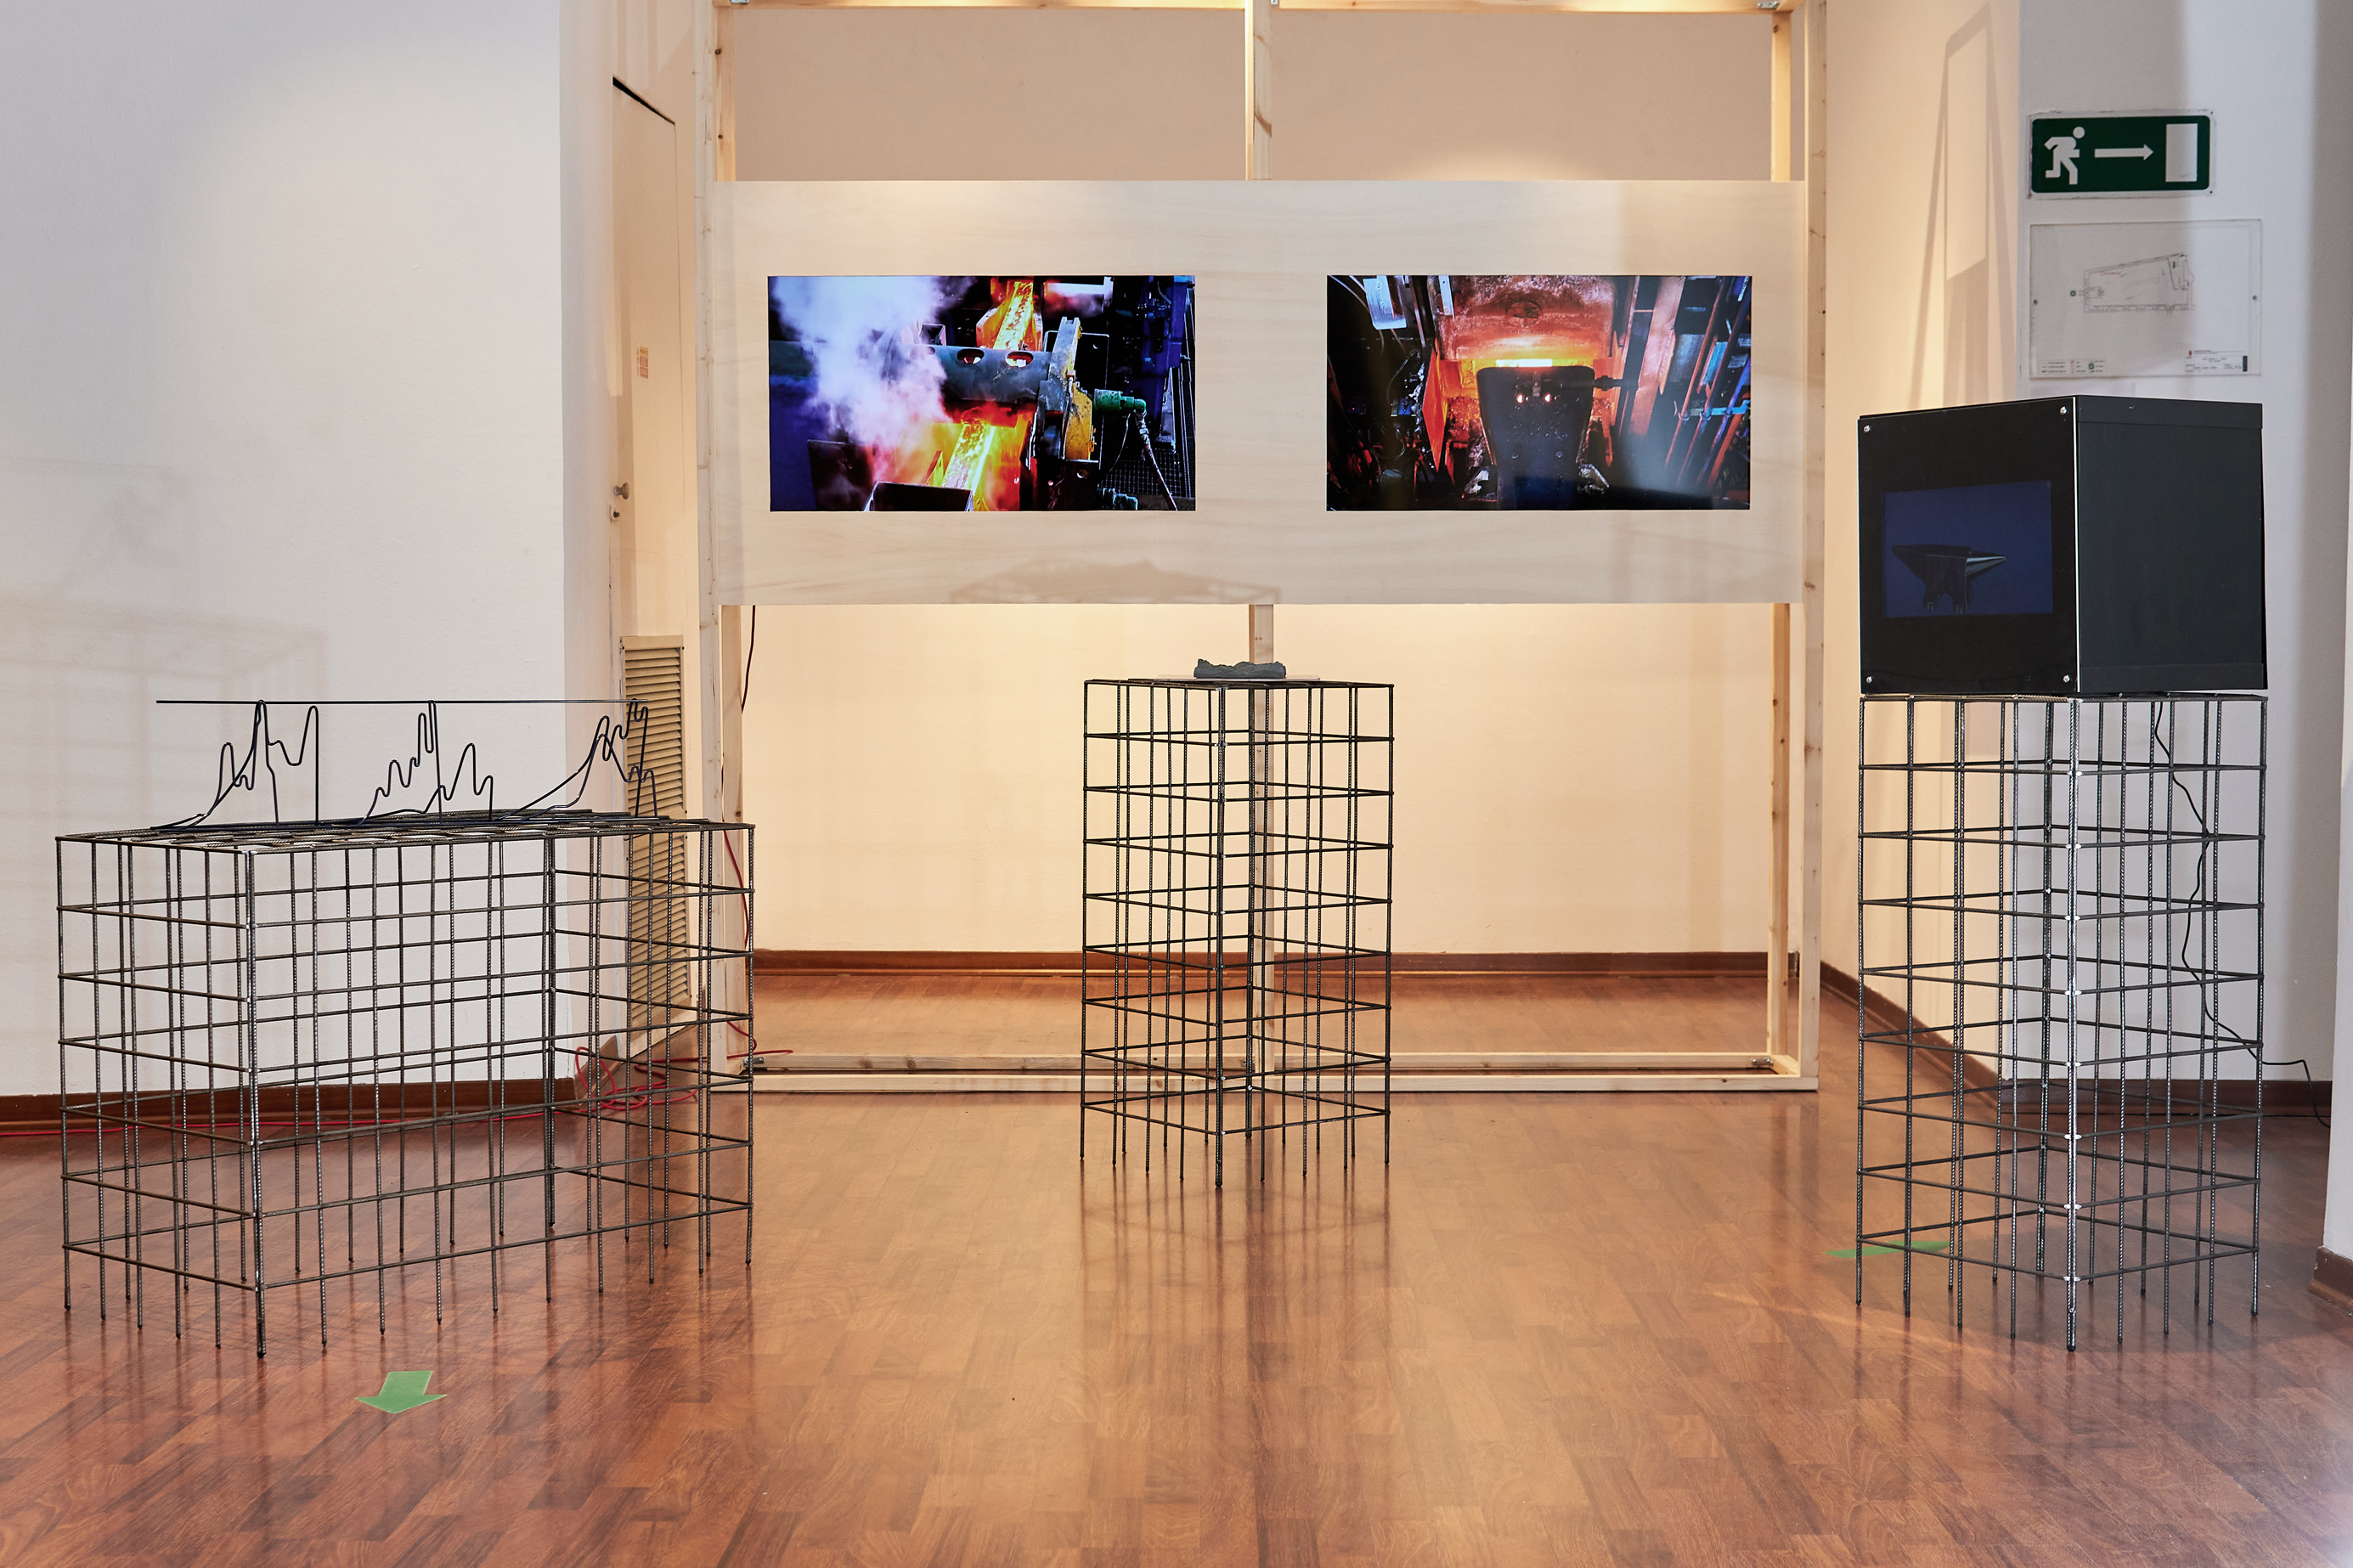 Installation view of La Rete <br/>Consisting of a two-screen video, 3D model animation, zinc coated 3D printed rendering of the Julian Alps and a re-imagined Pittini product. All objects sit on custom made wire mesh plinths made at the Pittini headquarters, Osoppo, Italy. <br/> <br/> "La Rete" is a dynamic and multifaceted work. It was born from the residence completed in Ferriere Nord Gruppo Pittini and narrates the resilient history of the company together with its deep bond with the territory. The various elements that make up the installation recall the company's production process, but also the suggestions that emerged in the exploration of the Udine foothills and Carnia, such as the 3D reproduction of the Predil quarries sprinkled with zinc dust or the reticular beam in which recreates the seismogram of the 1976 earthquake. The union of these elements symbolically generates a network of stories, people, work and knowledge.